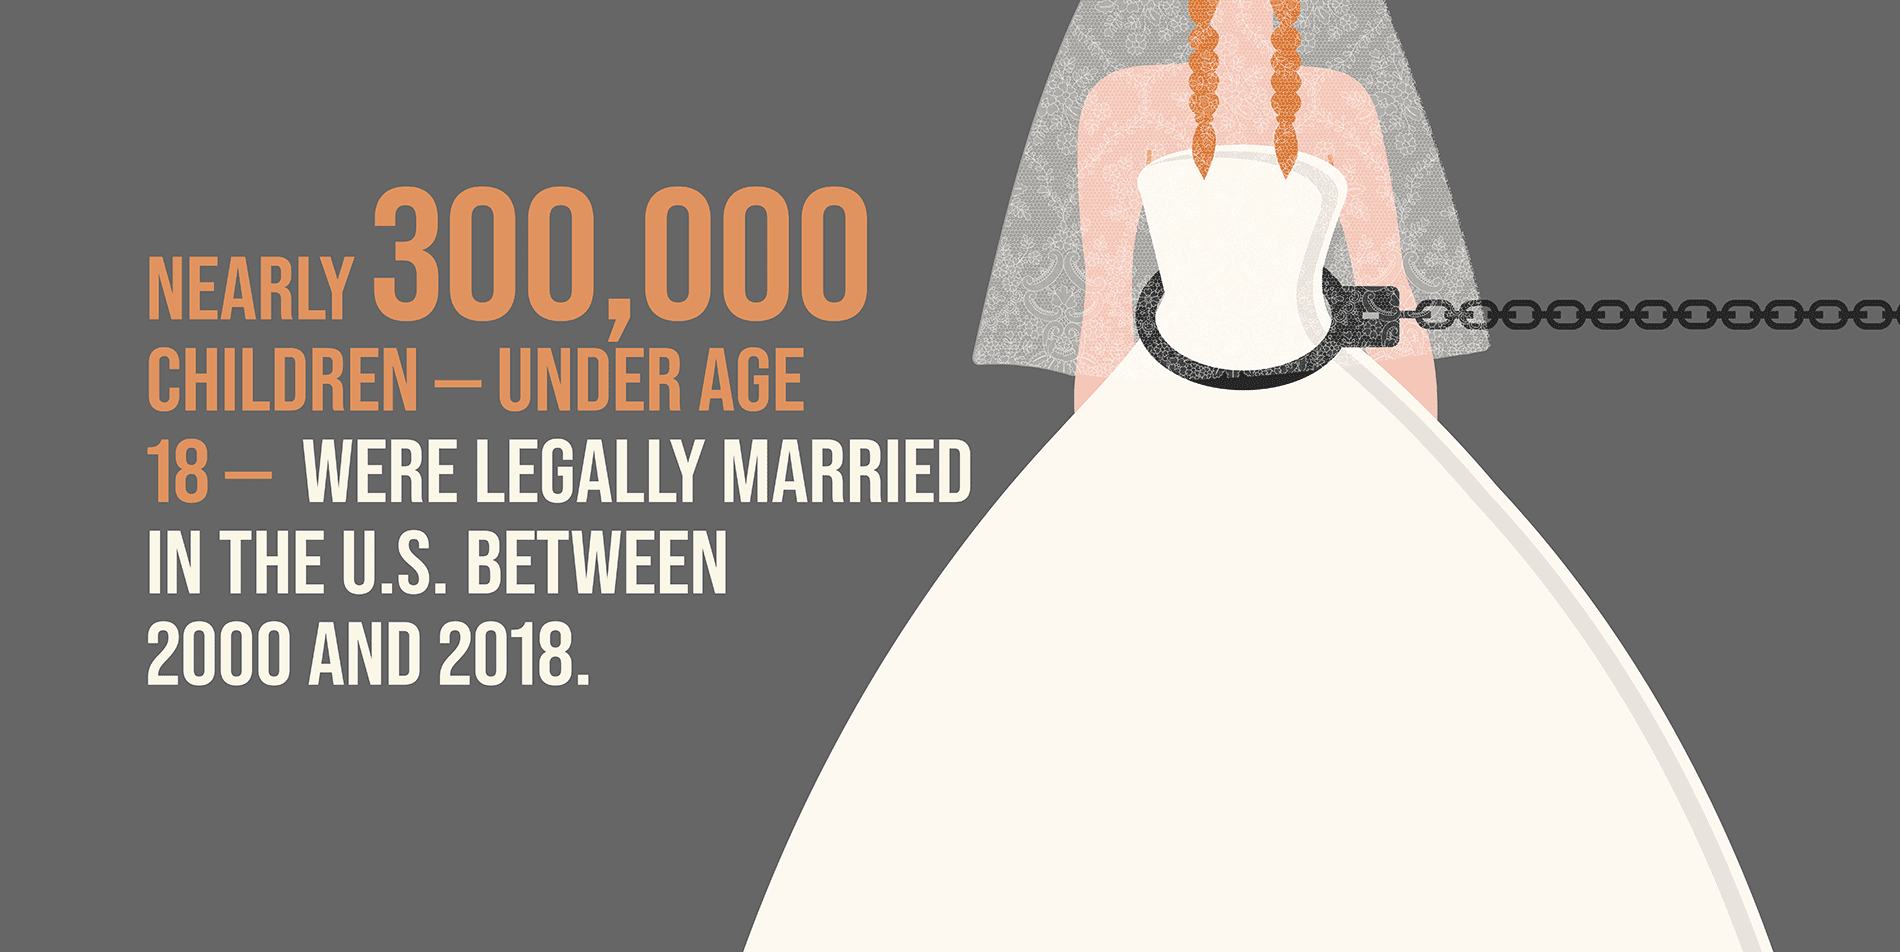 United States Child Marriage Problem Study Findings (April 2021) pic